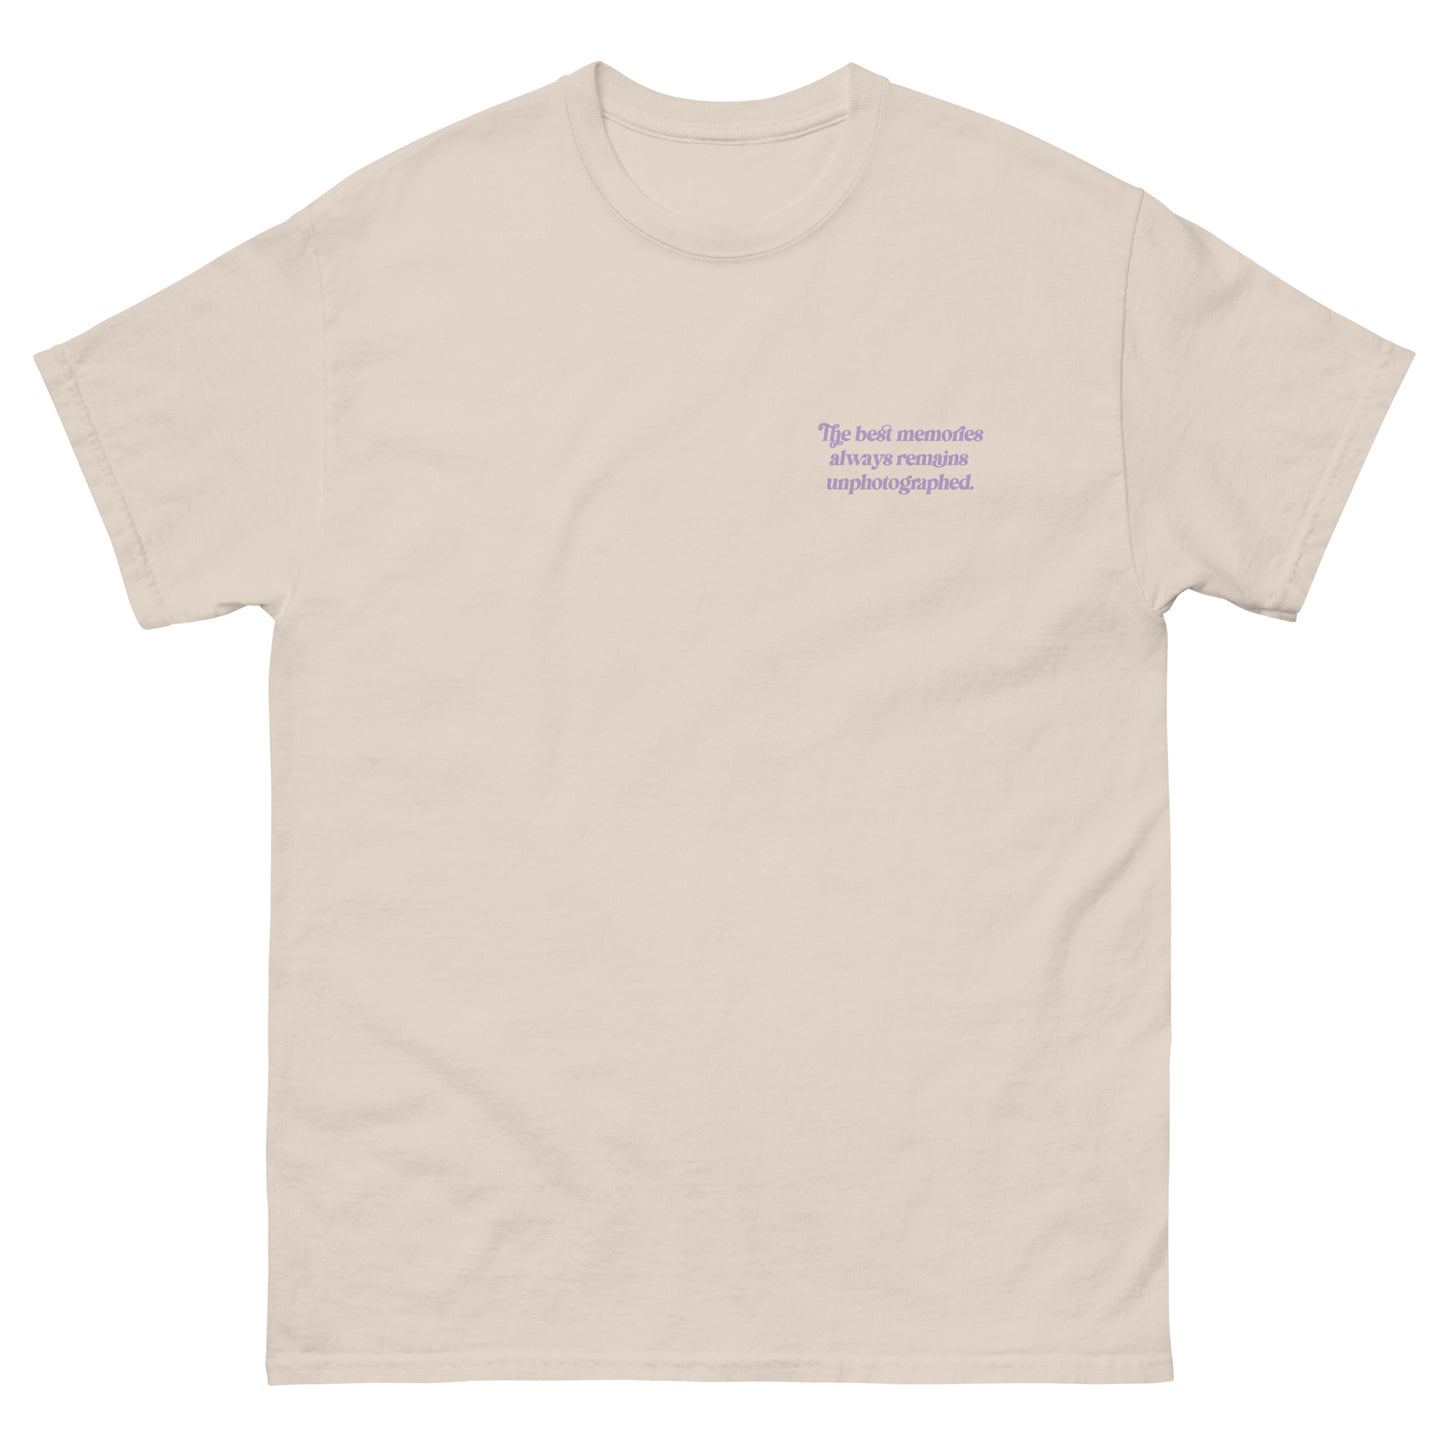 Beige High Quality Tee - Front Design with "The best memories always remains unphotographed " print on left chest - Back Design with a Phrase "The best memories always remains unphotographed." print and three pictures of sky.